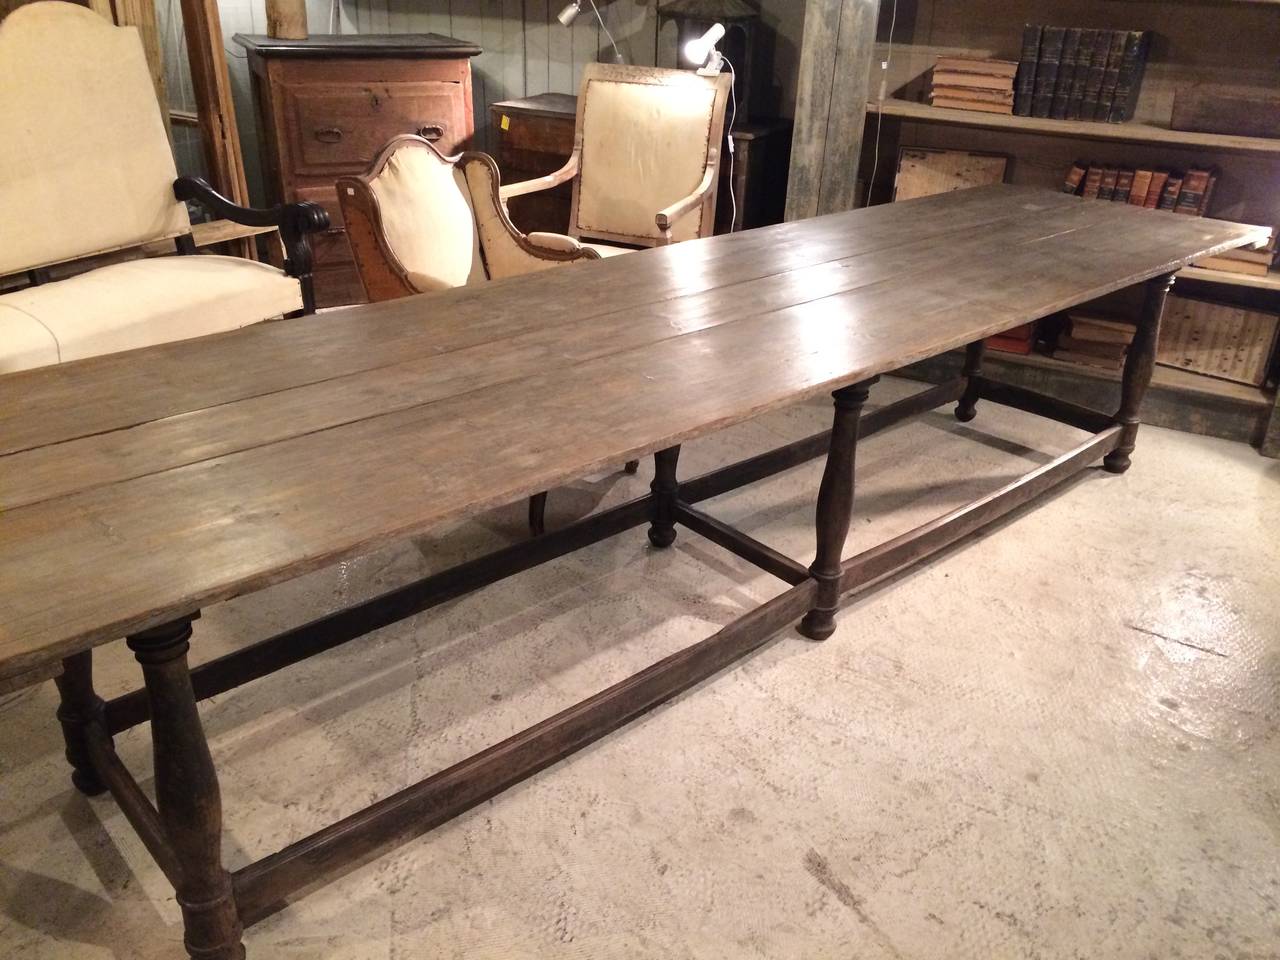 Early 19th century 11ft French oak refectory table with deep gray patina, carved legs and stretchers.